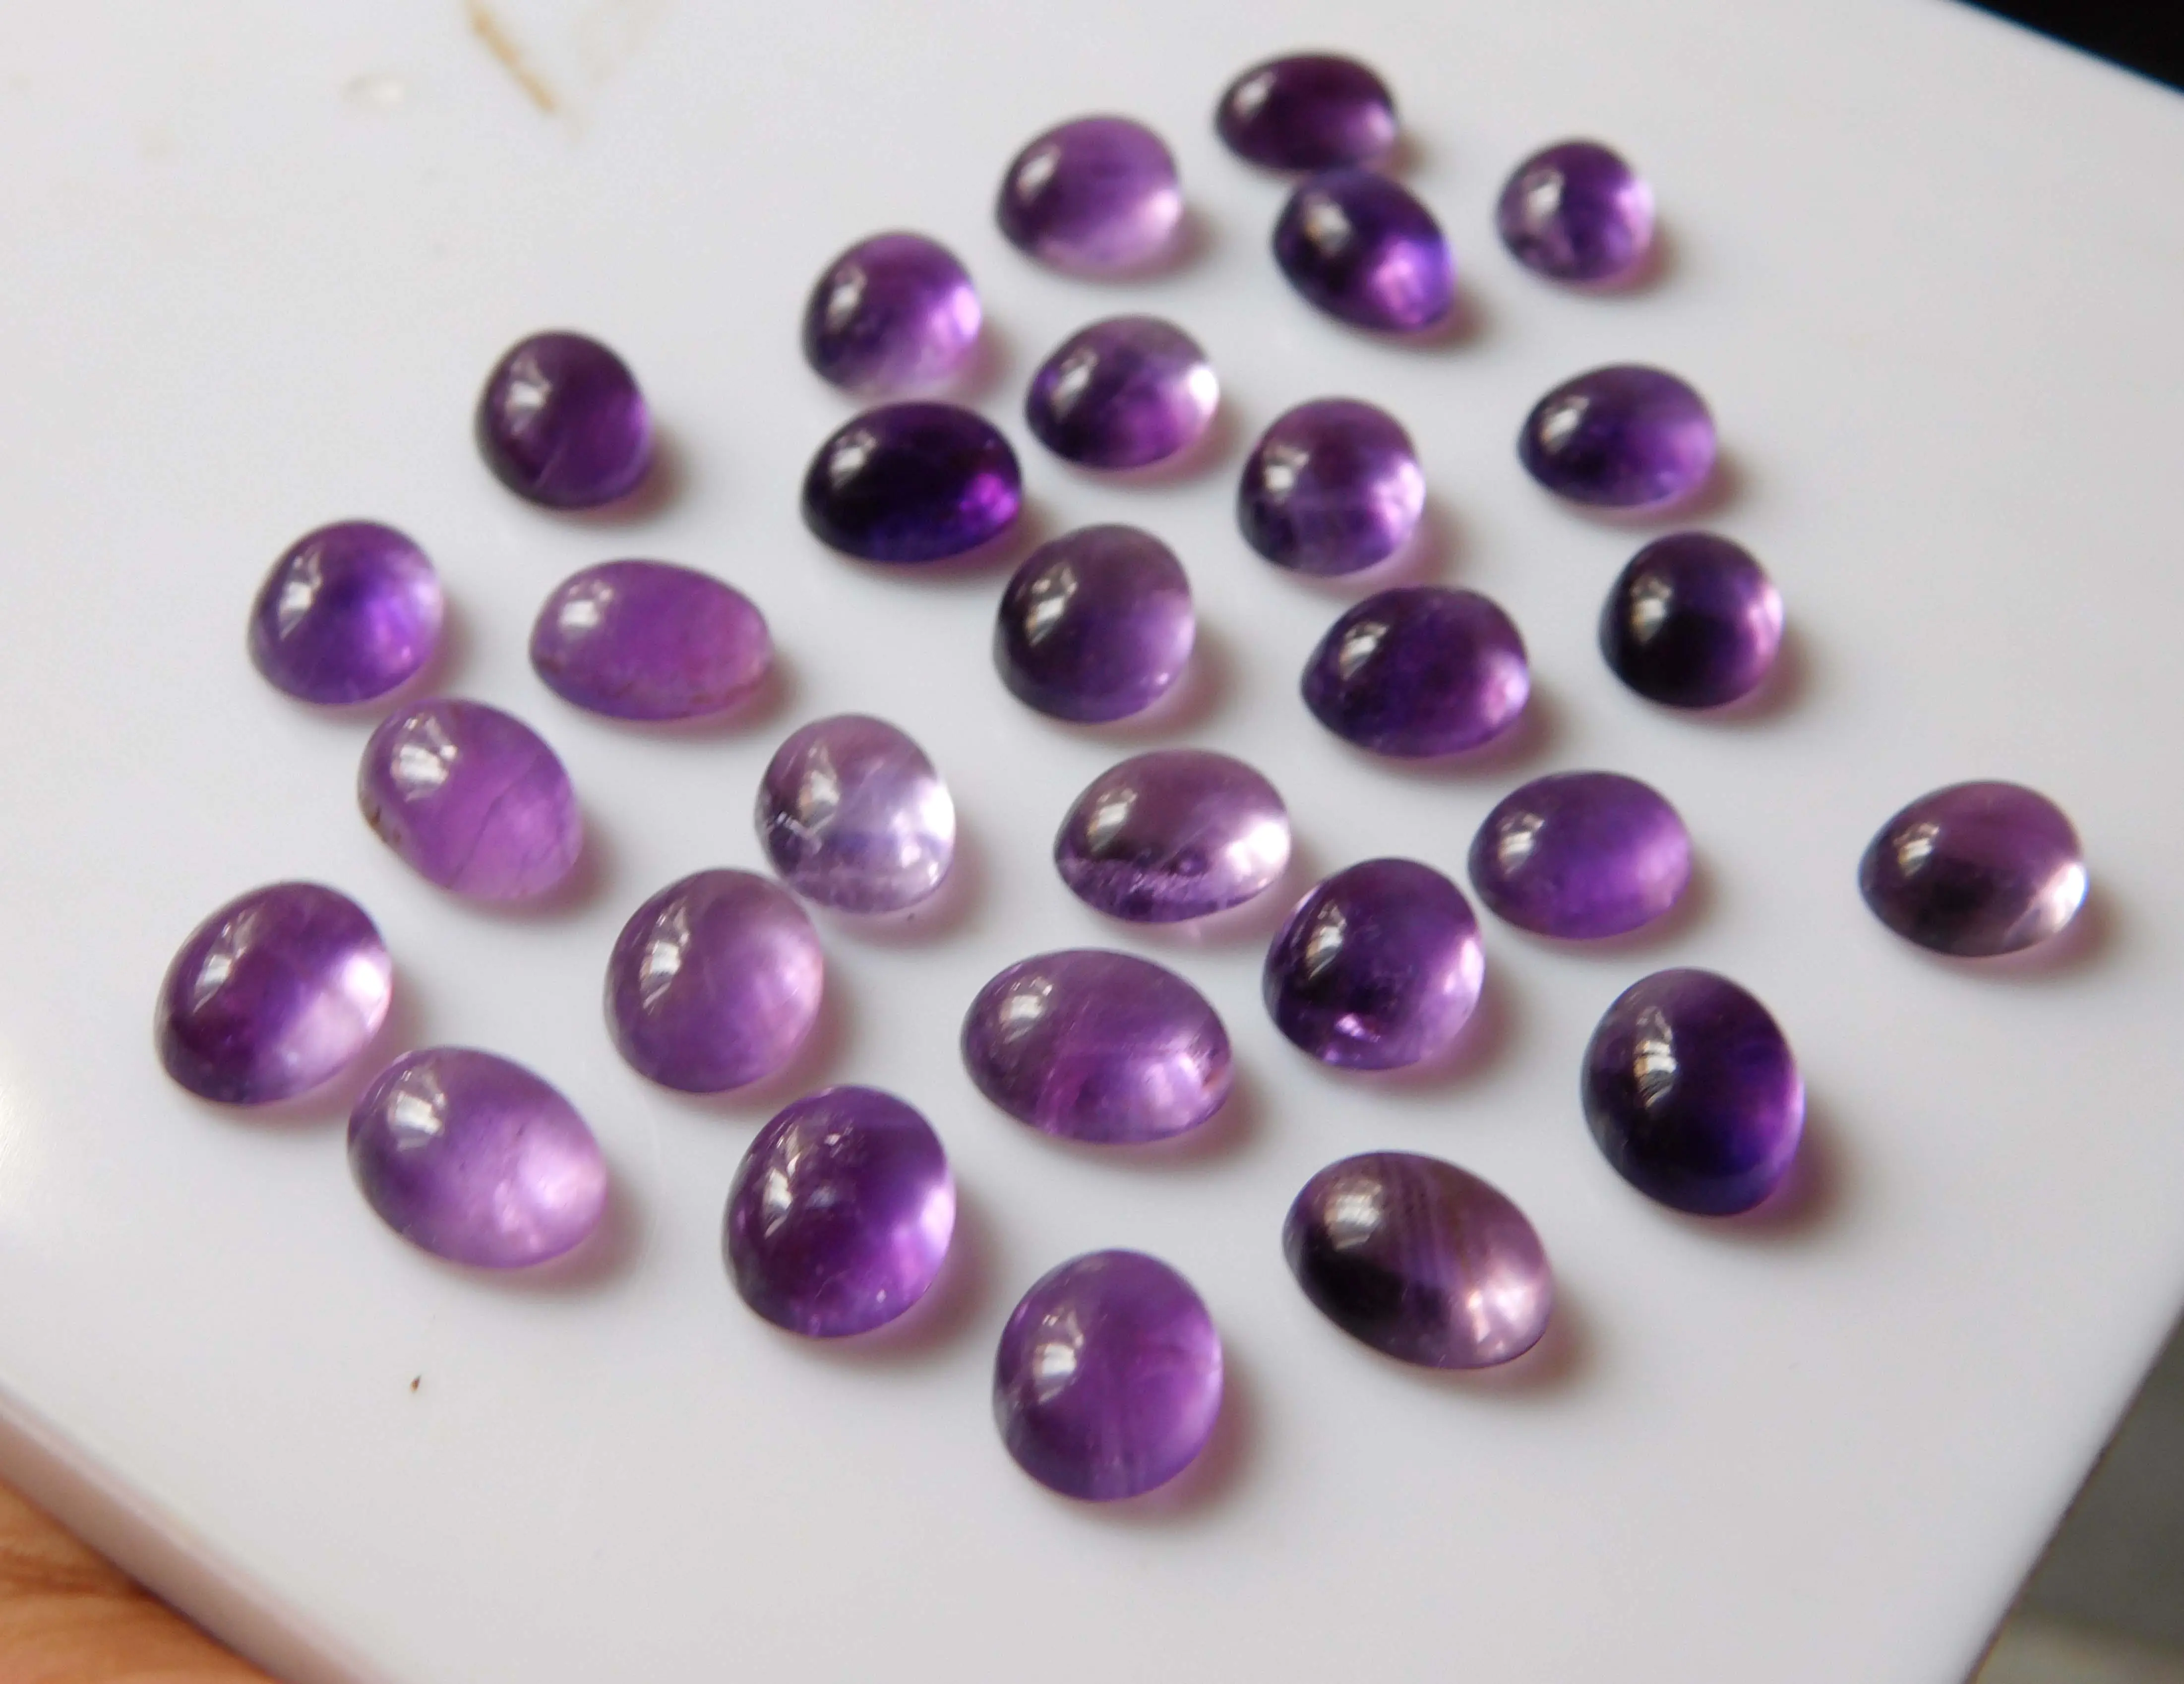 Natural Amethyst Oval Shape Cabochon Flat Back Calibrated AAA+ Quality Wholesale Loose Gemstones 6x8 MM Purple Color African Cab